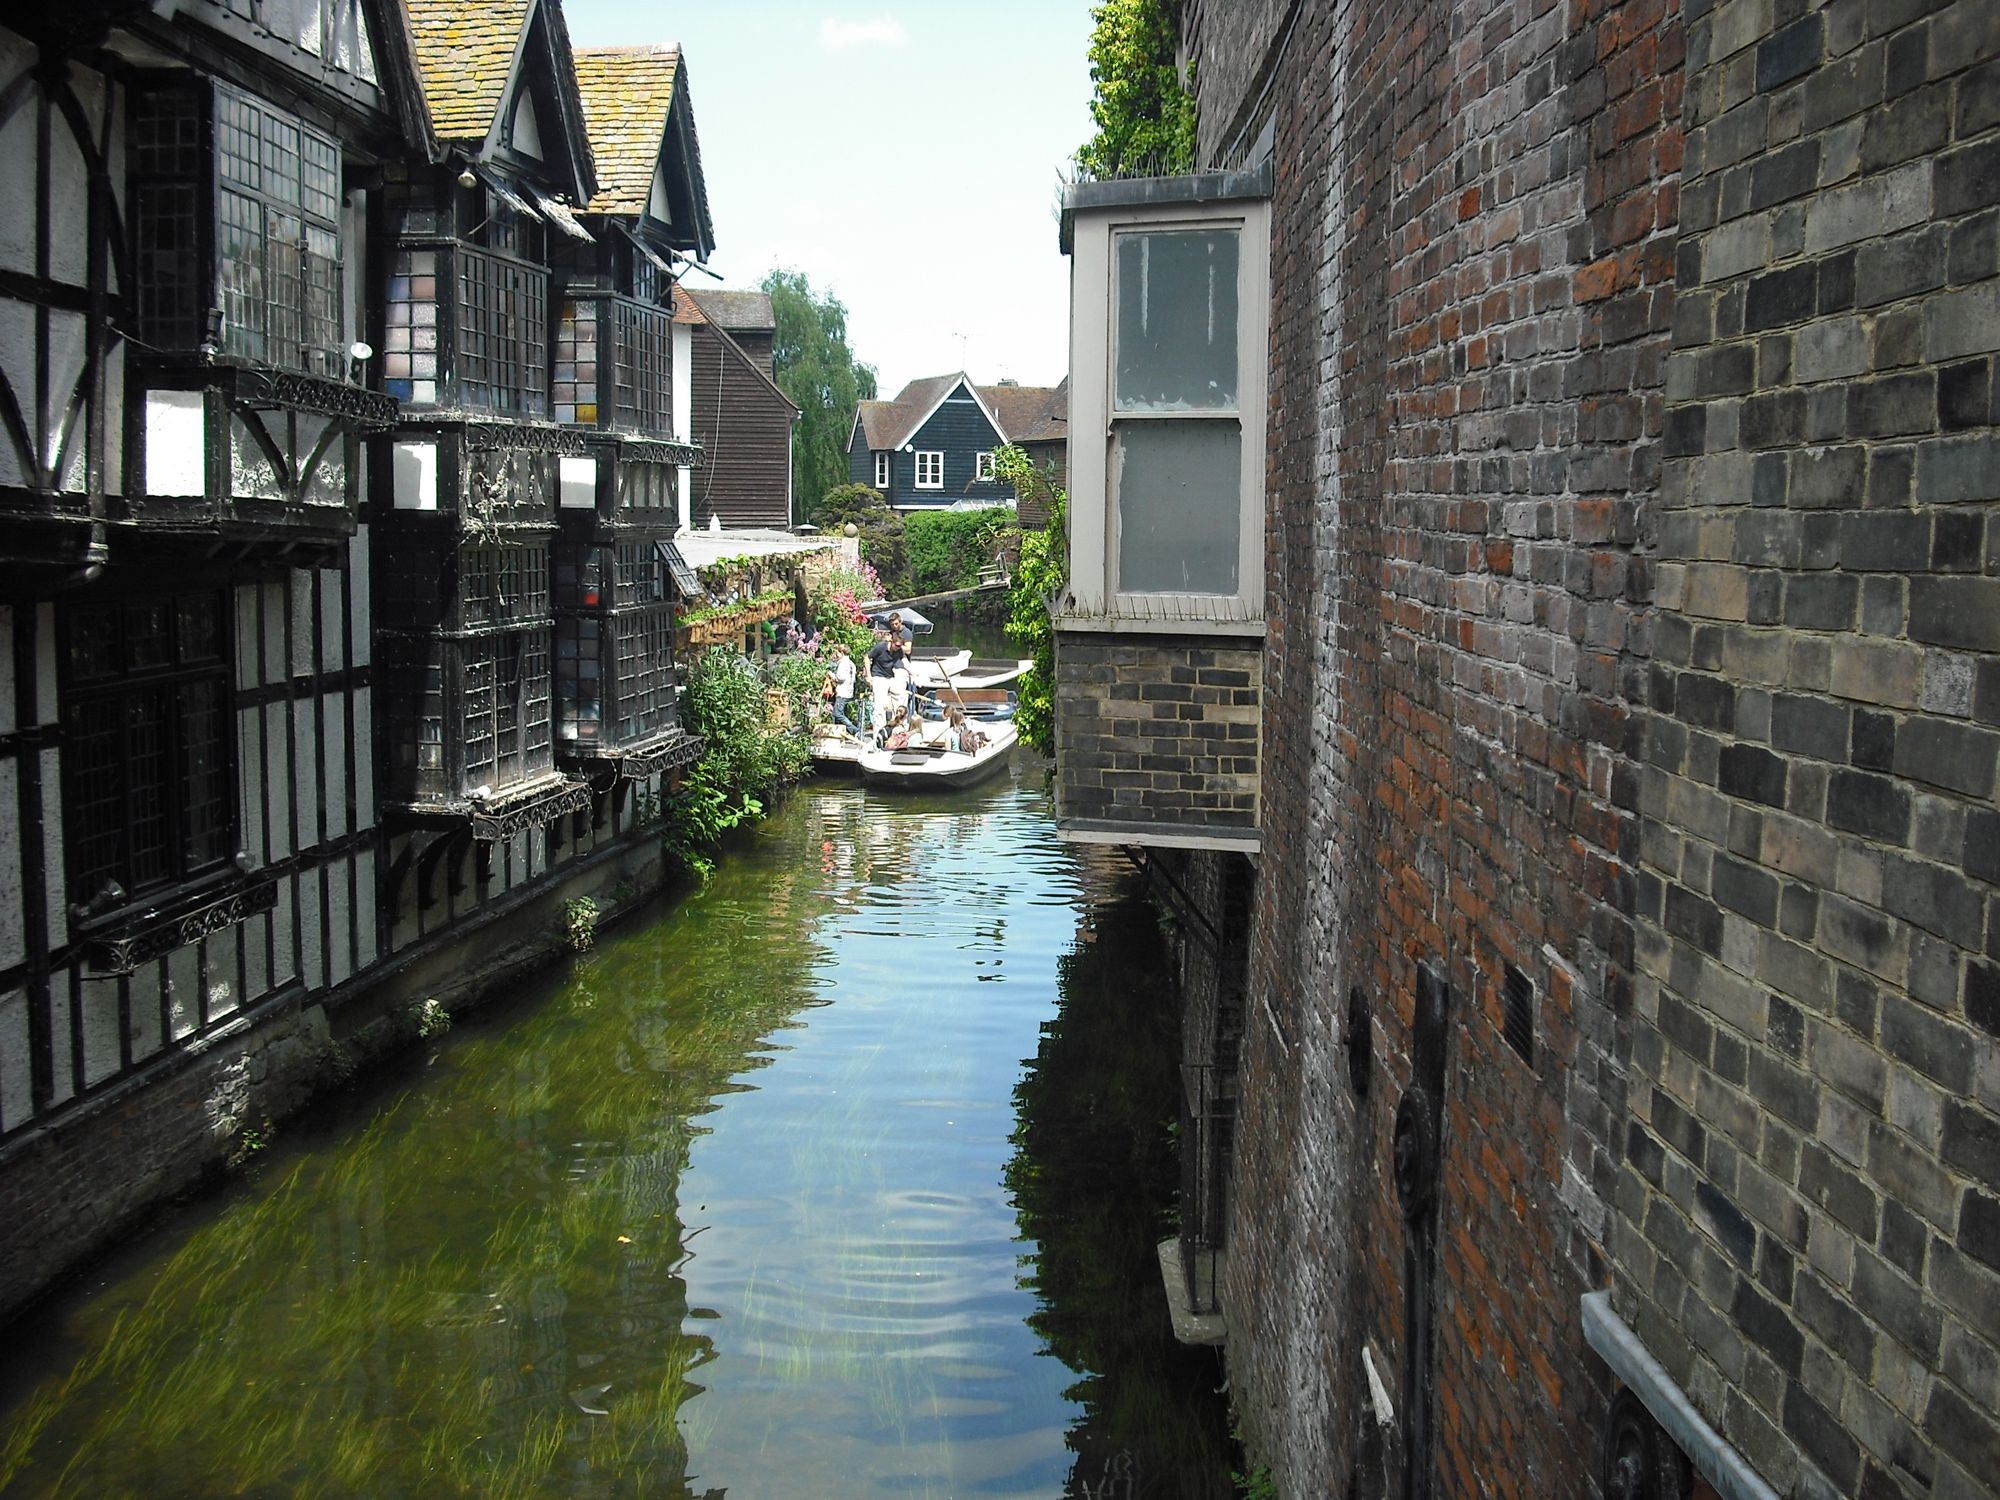 Hotels, B&Bs & Self-Catering in Canterbury - Cool Places ...